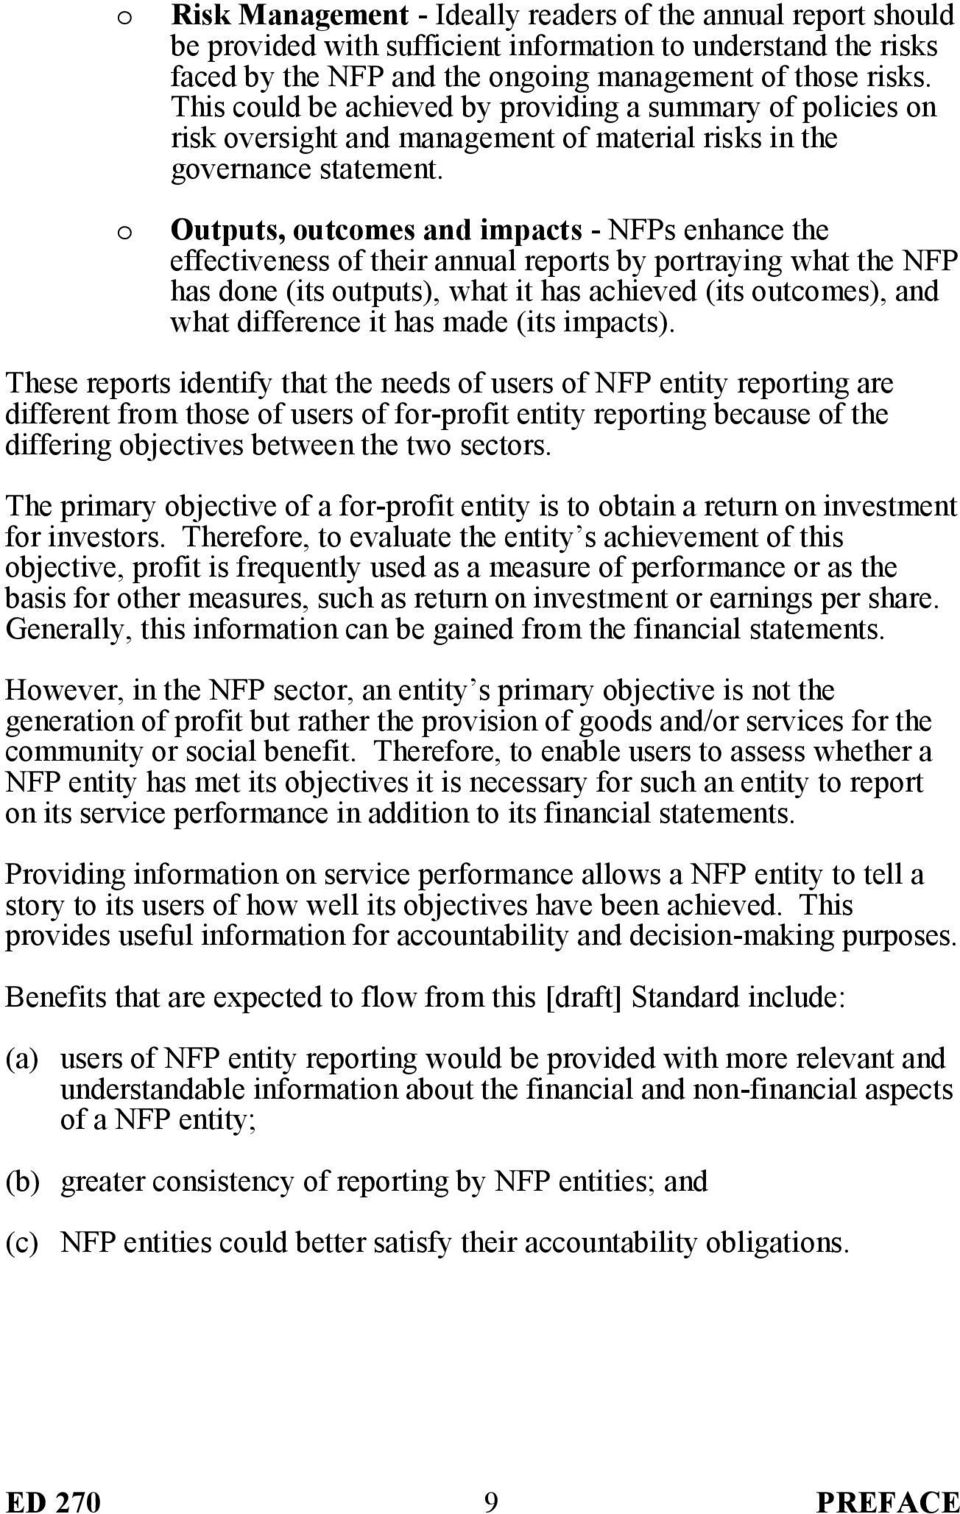 Outputs, outcomes and impacts - NFPs enhance the effectiveness of their annual reports by portraying what the NFP has done (its outputs), what it has achieved (its outcomes), and what difference it